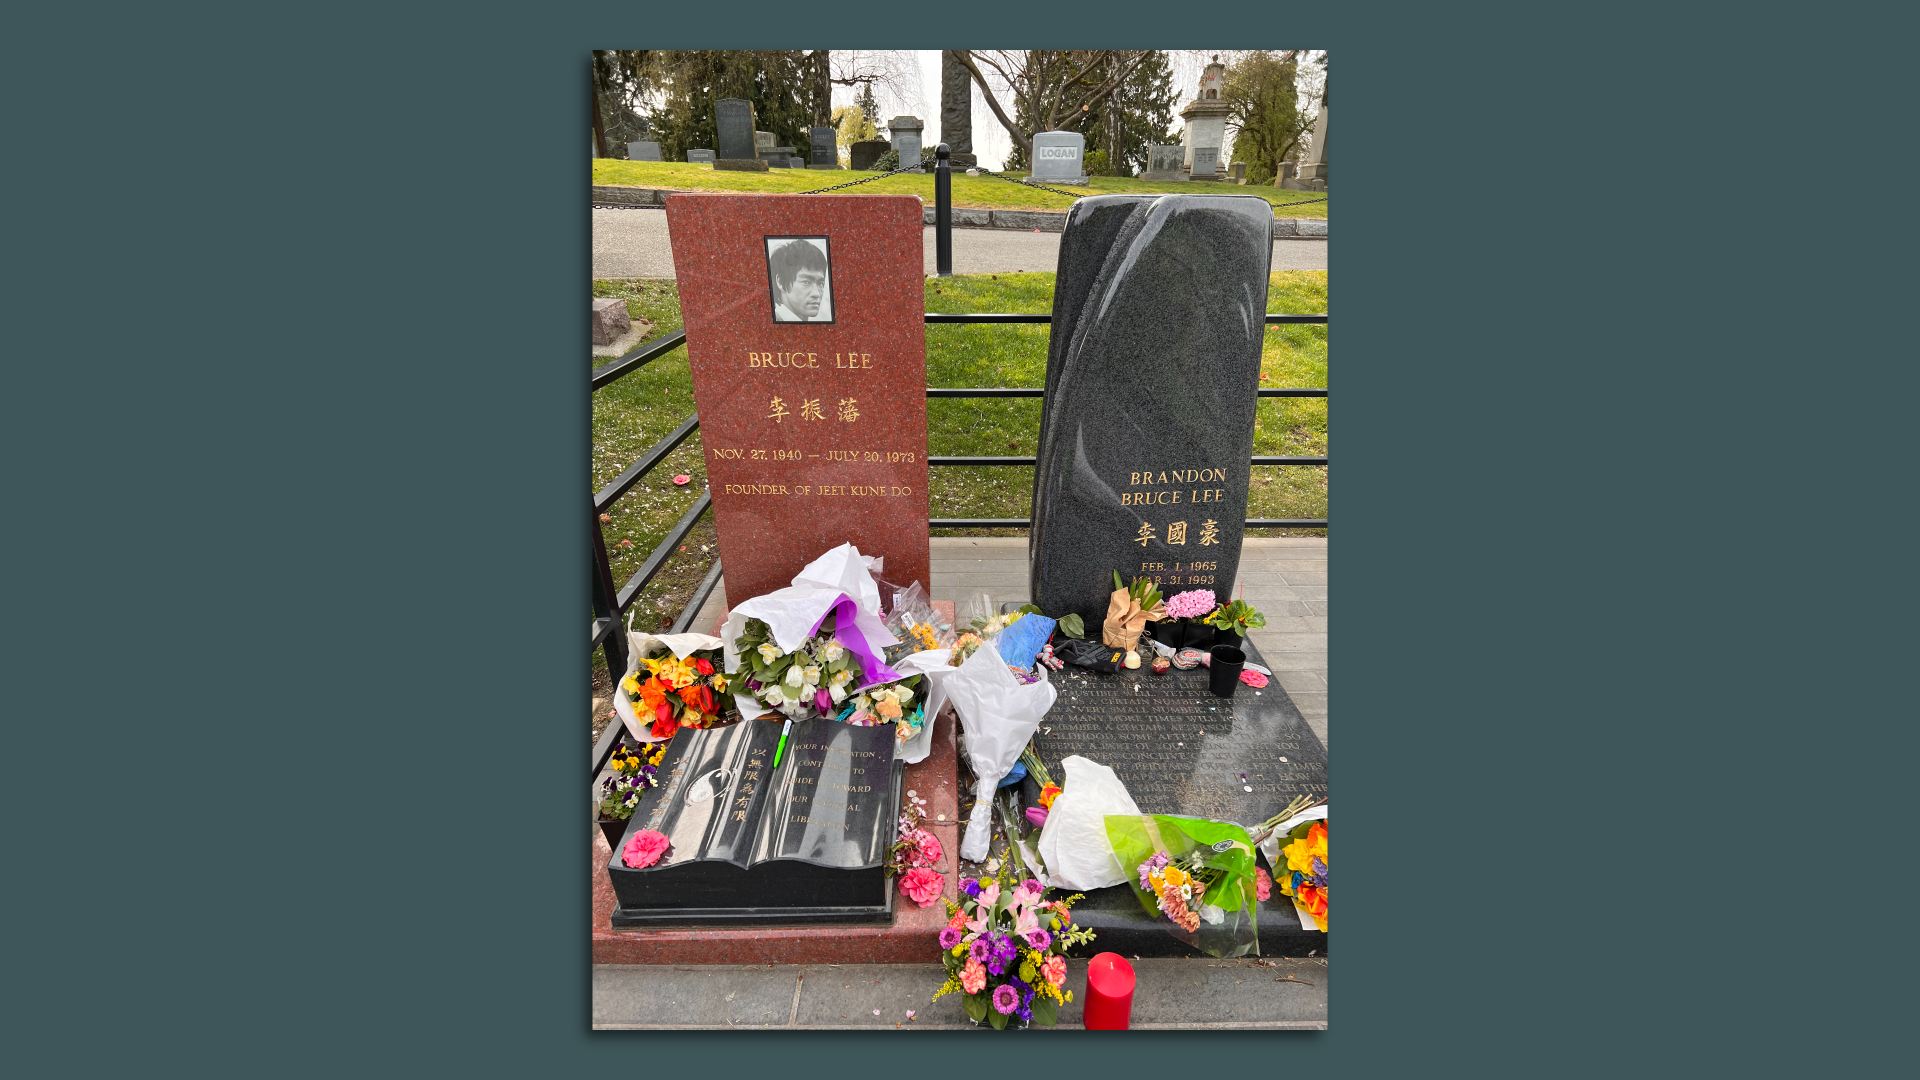 Picture of the gravesites of Bruce and Brandon Lee.